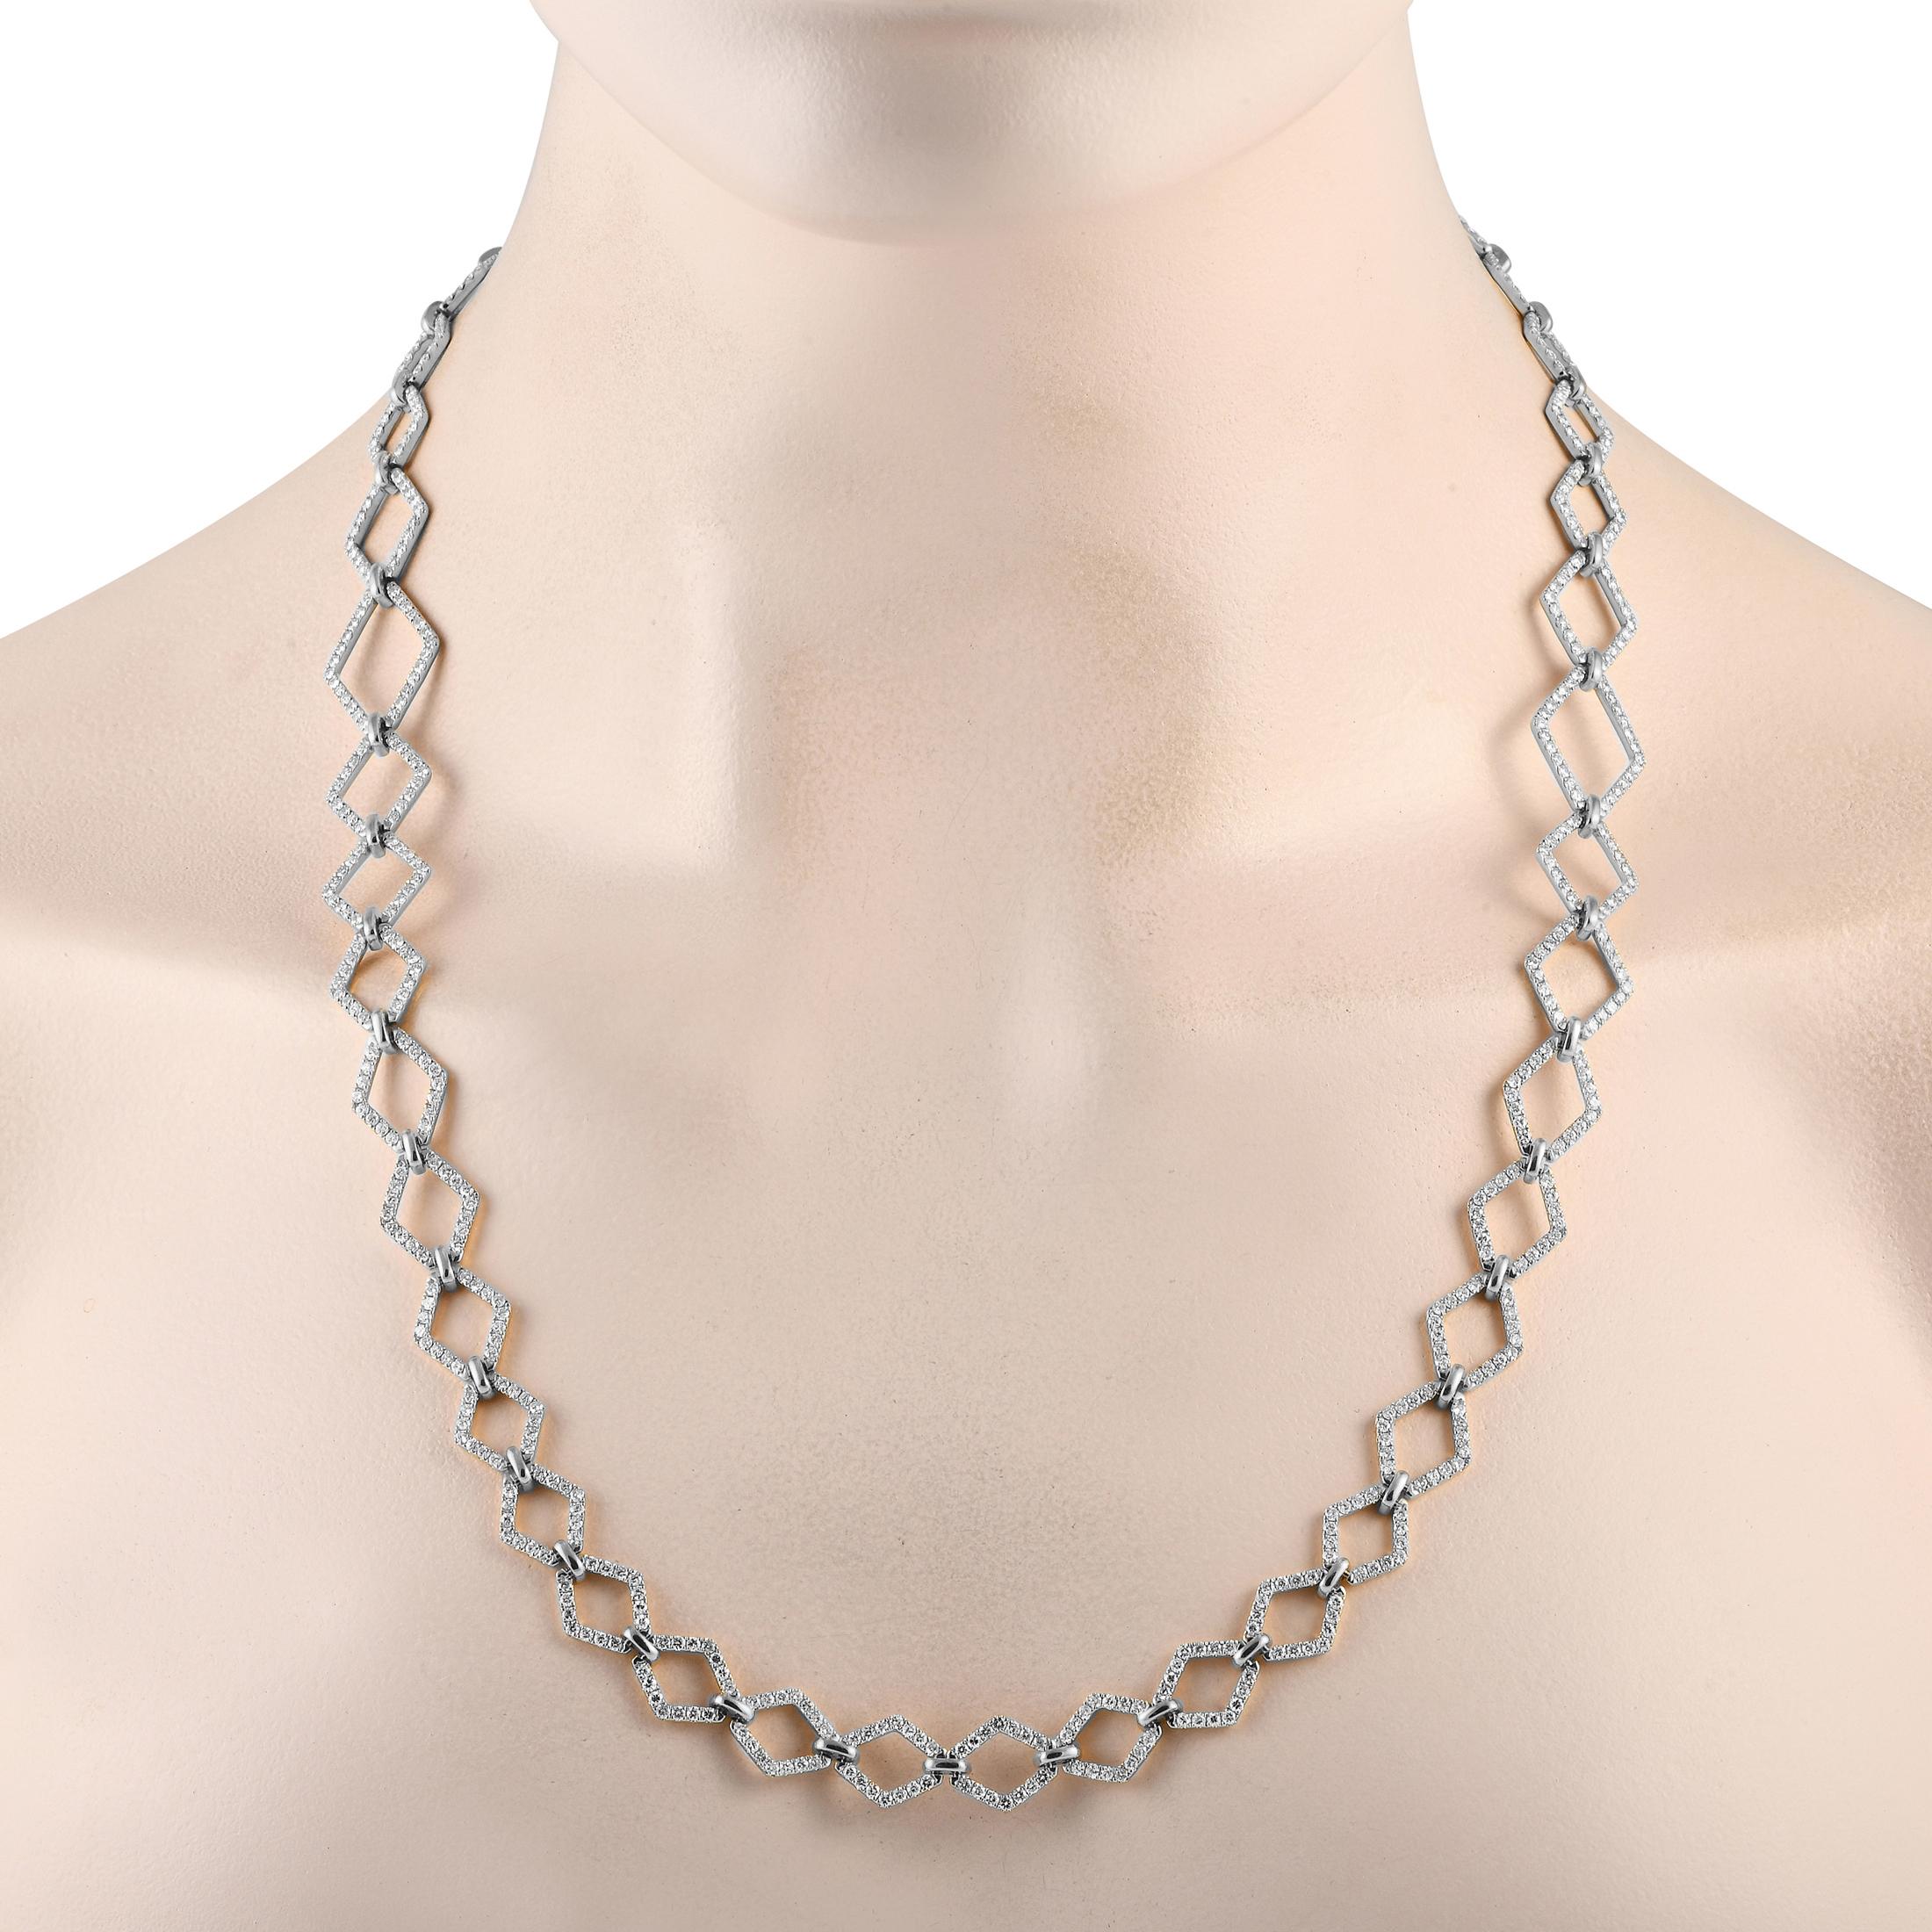 This stunning 18K White Gold necklace features a delicate yet dramatic design. Accented by negative space and sparkling diamonds with a total weight of 10.60 carats, this piece measures 24.5” long and will continually make a statement. 

This